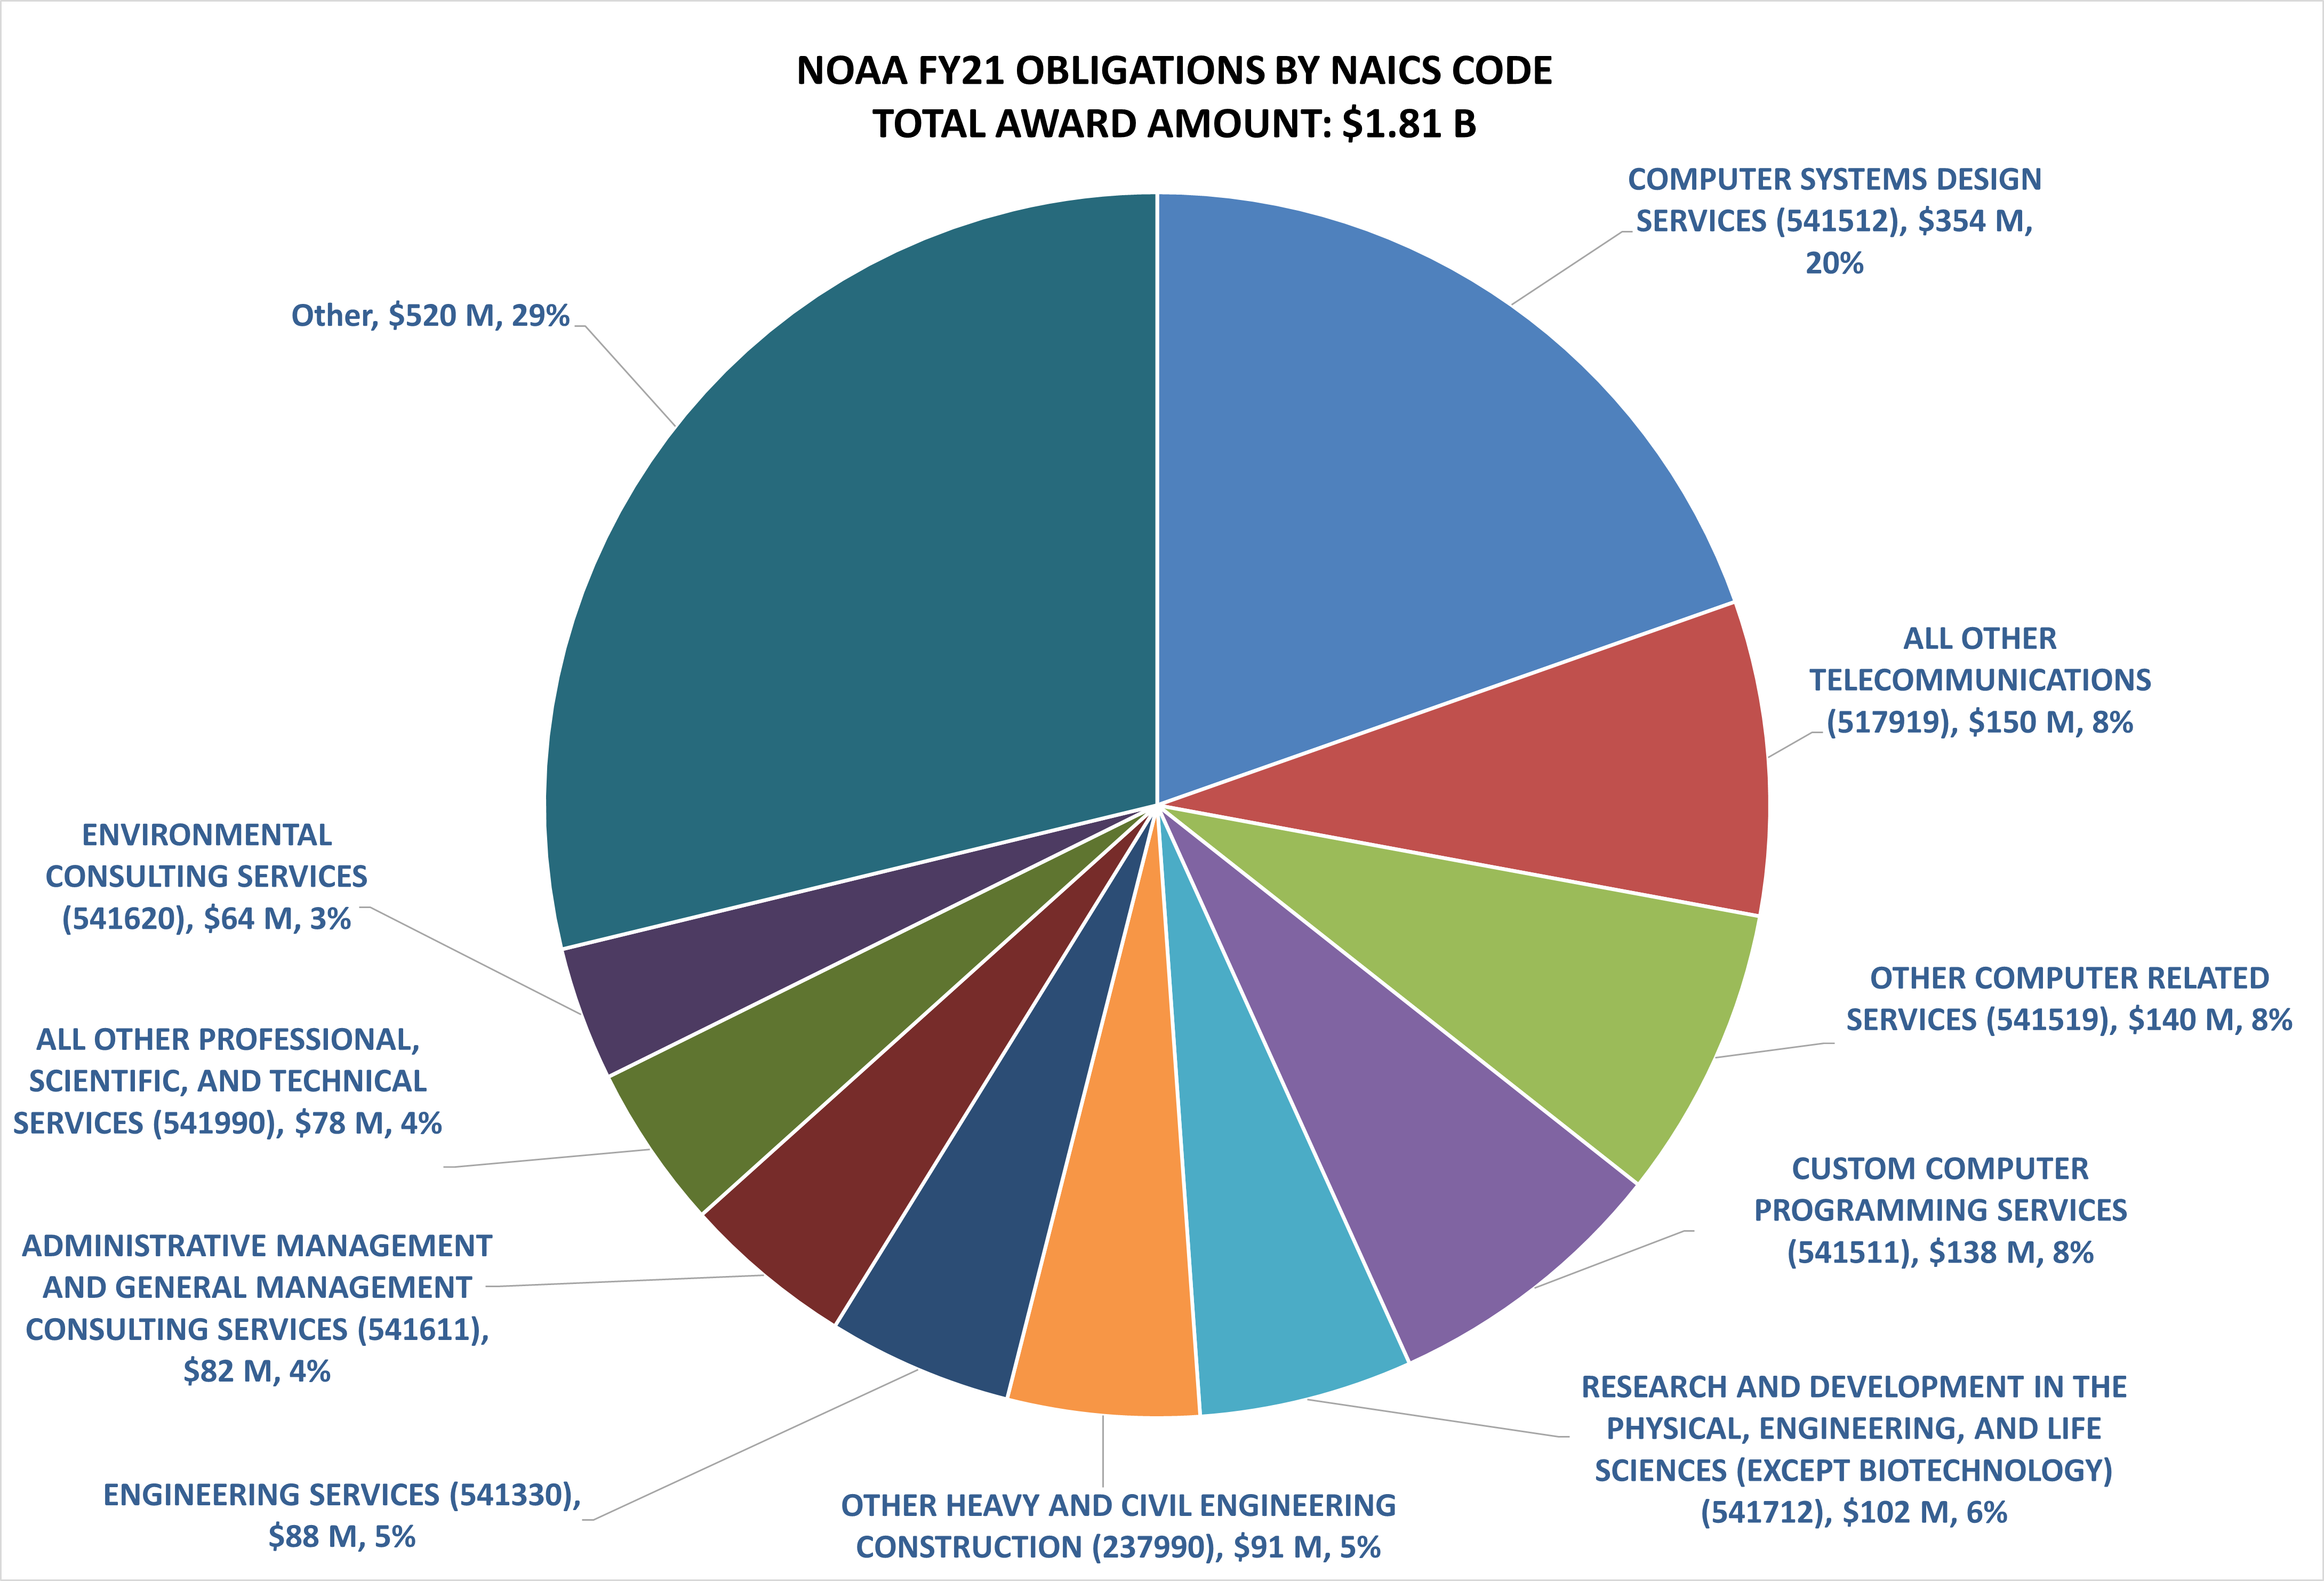 Pie chart showing NOAA FY 21 Obligations by NAICS Code: COMPUTER SYSTEMS DESIGN SERVICES (541512): $354M, 20%; ALL OTHER TELECOMMUNICATIONS (517919): $150M, 8%; OTHER COMPUTER RELATED SERVICES (541519): $140M, 8%; CUSTOM COMPUTER PROGRAMMING SERVICES (541511): $138M, 8%; RESEARCH AND DEVELOPMENT IN THE PHYSICAL, ENGINEERING, AND LIFE SCIENCES (EXCEPT BIOTECHNOLOGY) (541712): $102M, 6%; OTHER HEAVY AND CIVIL ENGINEERING CONSTRUCTION (237990): $91M, 5%; ENGINEERING SERVICES (541330): $88M; 5%; ADMINISTRATIVE 